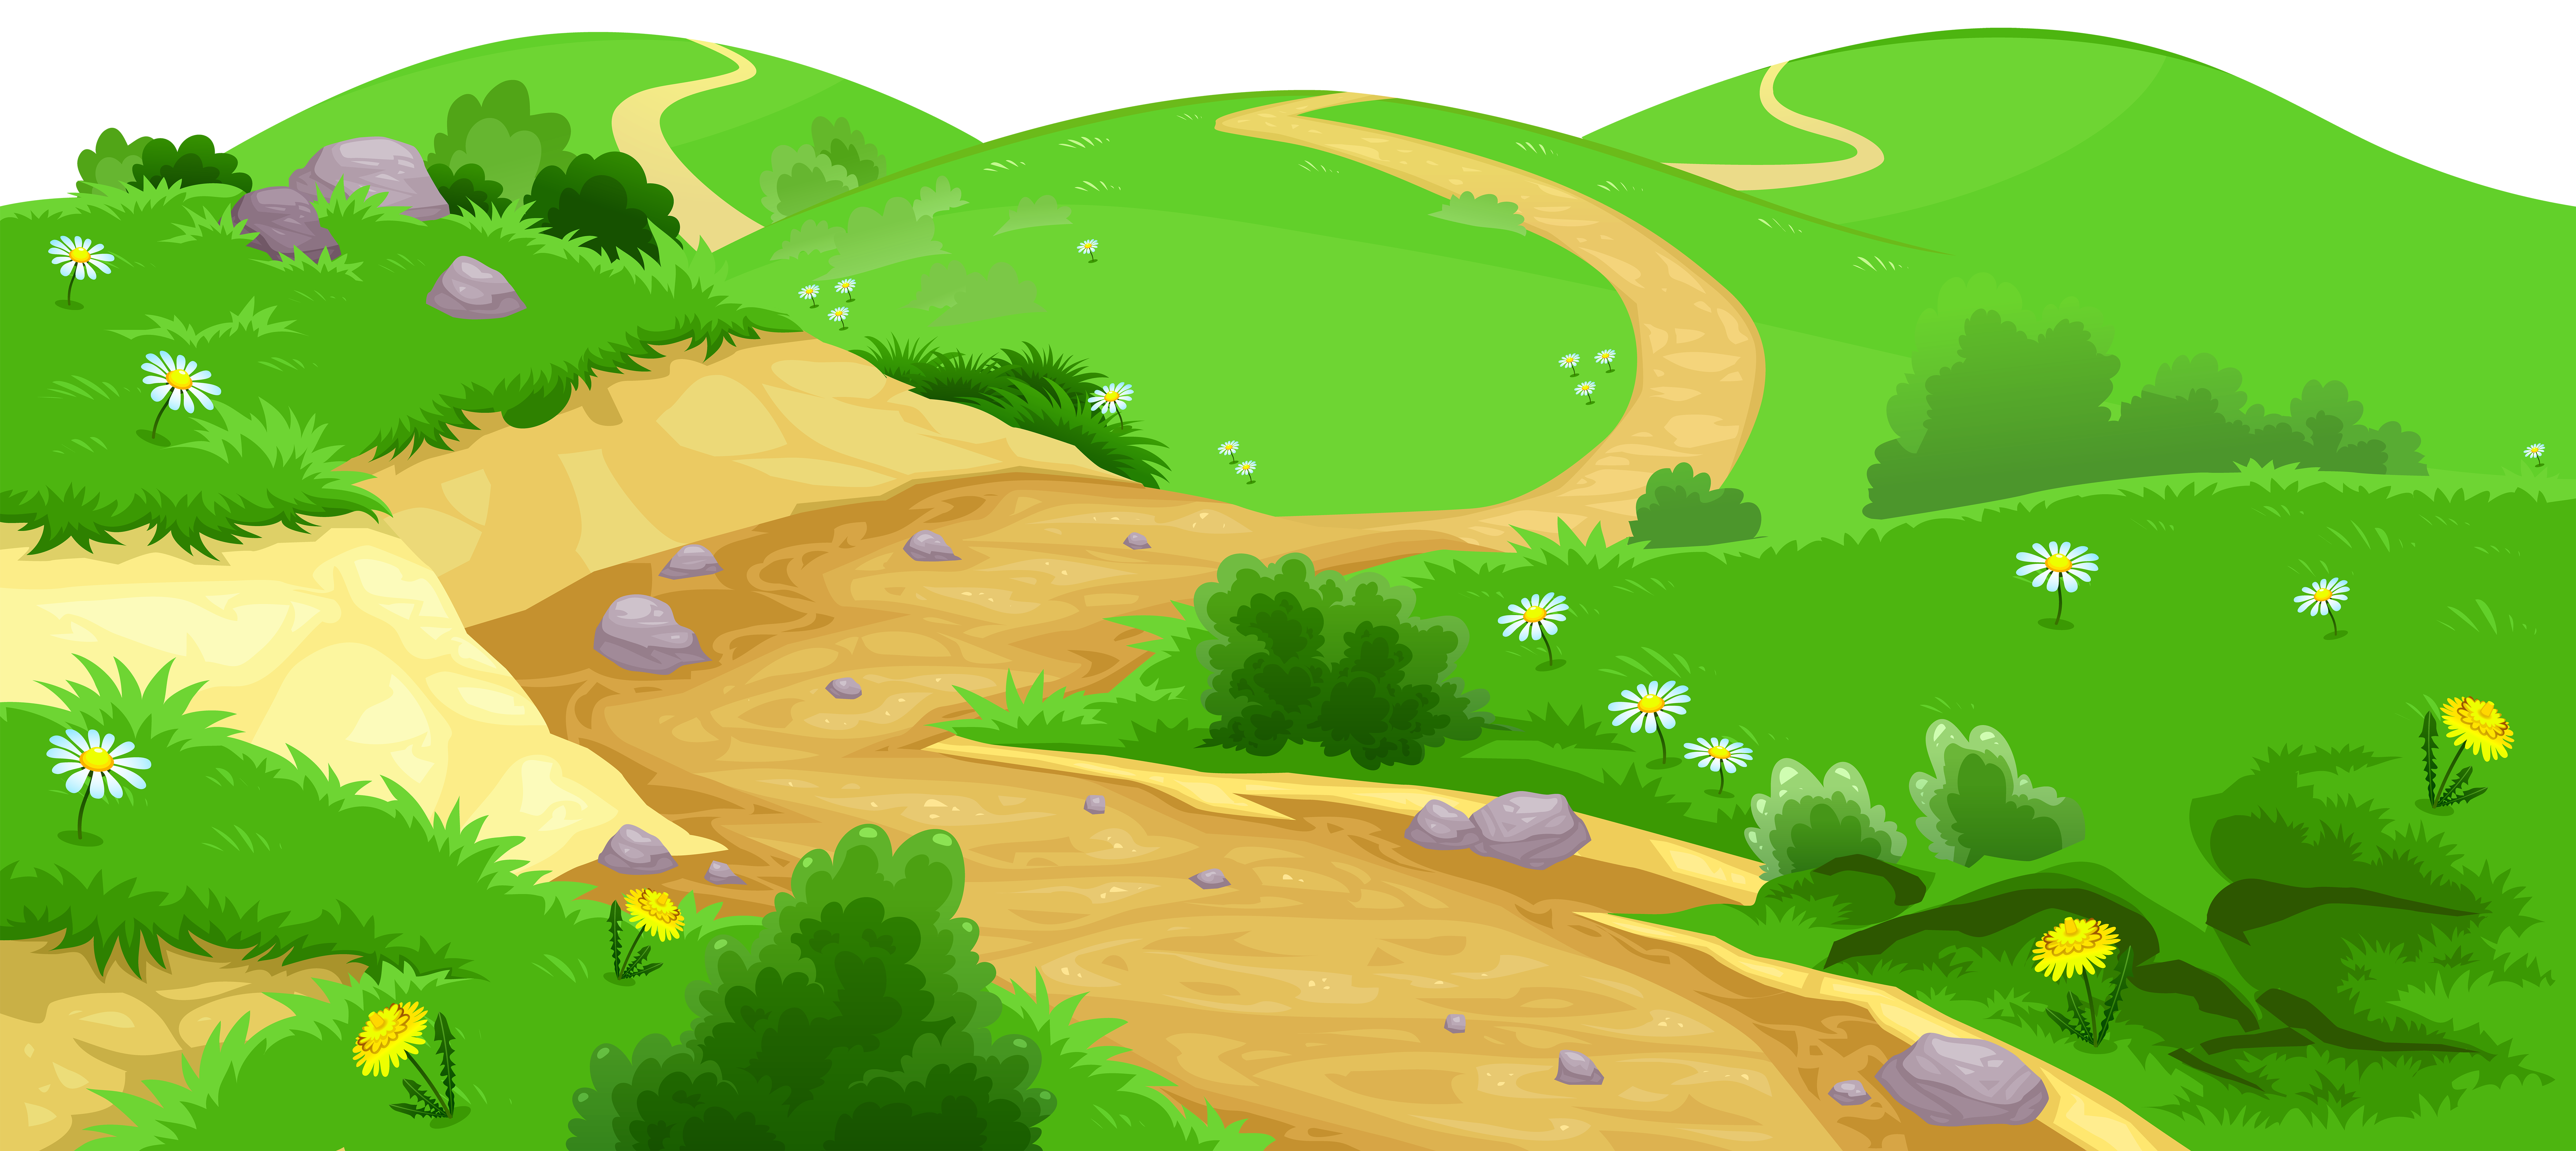 Valley ground transparent png. Sunny clipart scenery